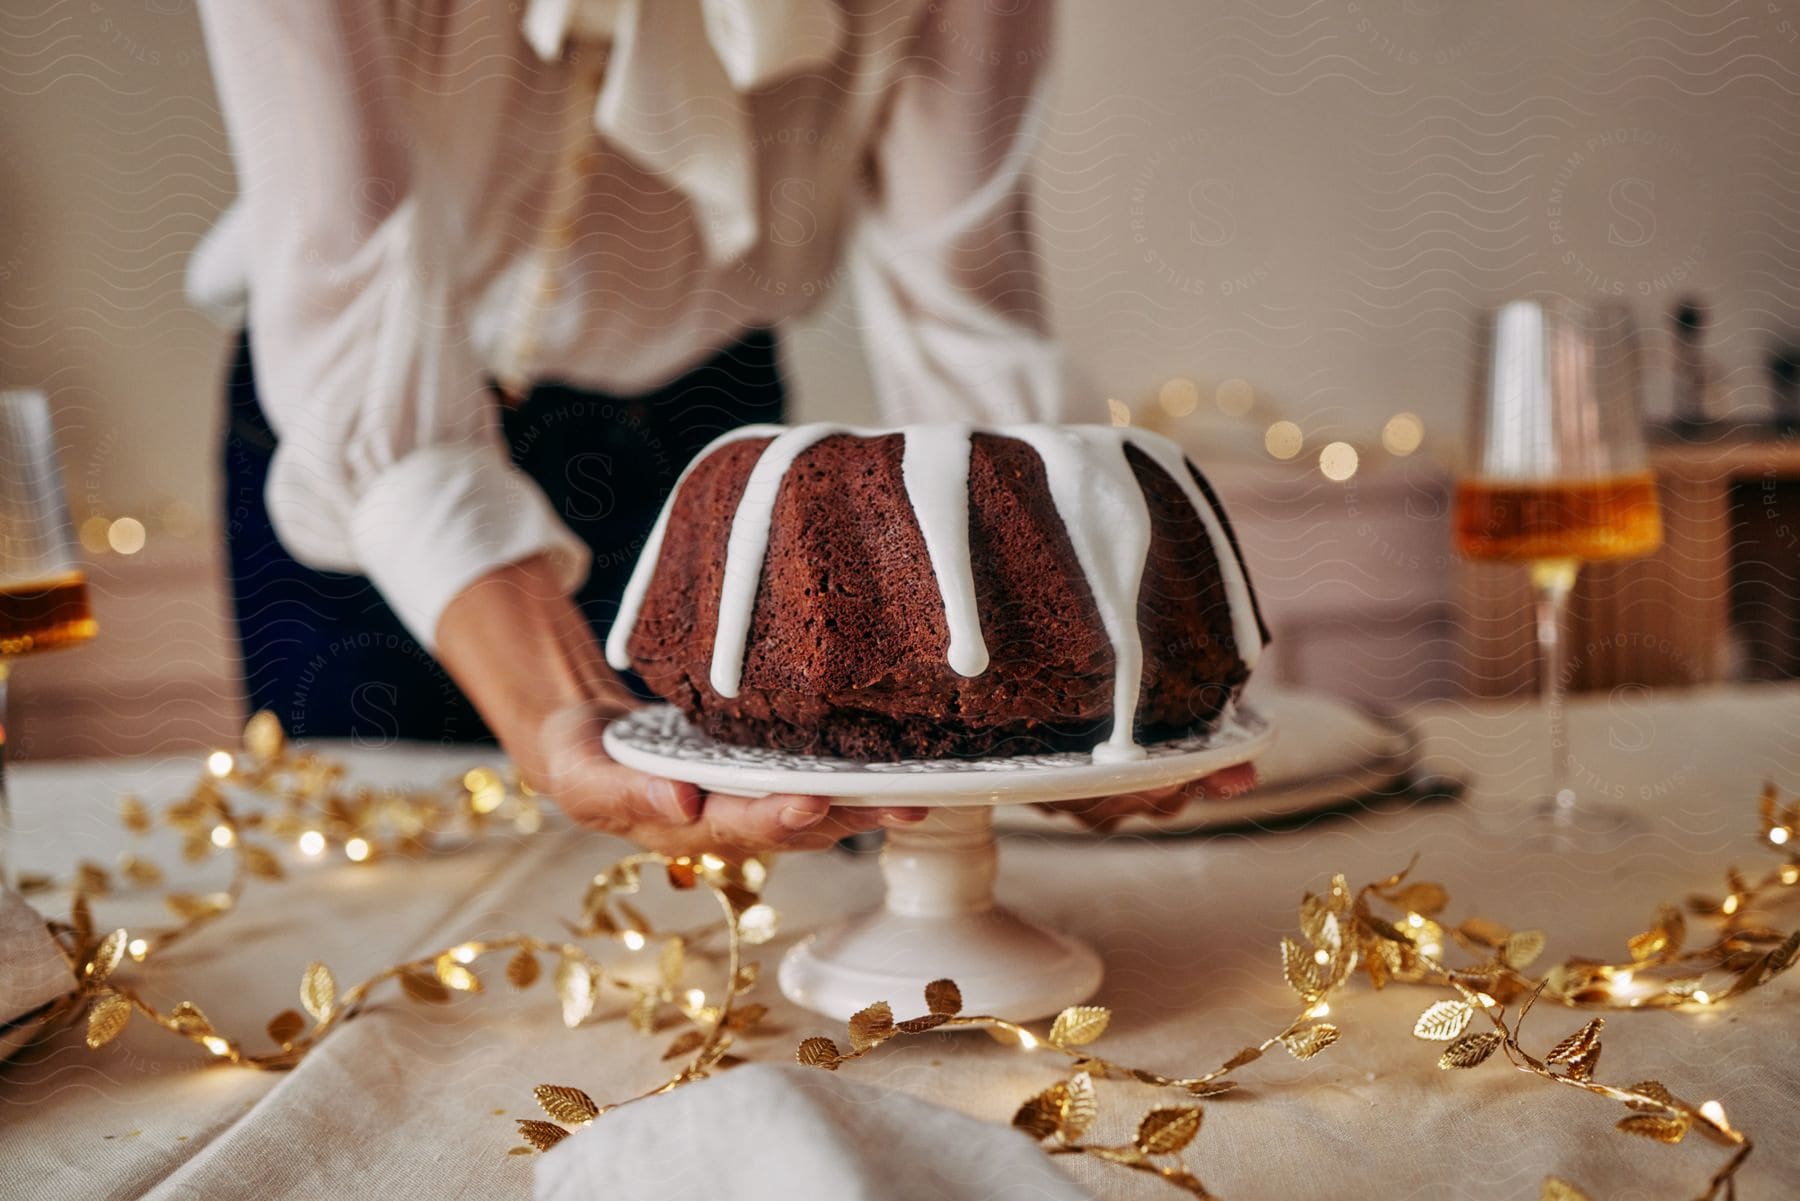 A woman is placing a chocolate bundt cake on a table decorated for a party